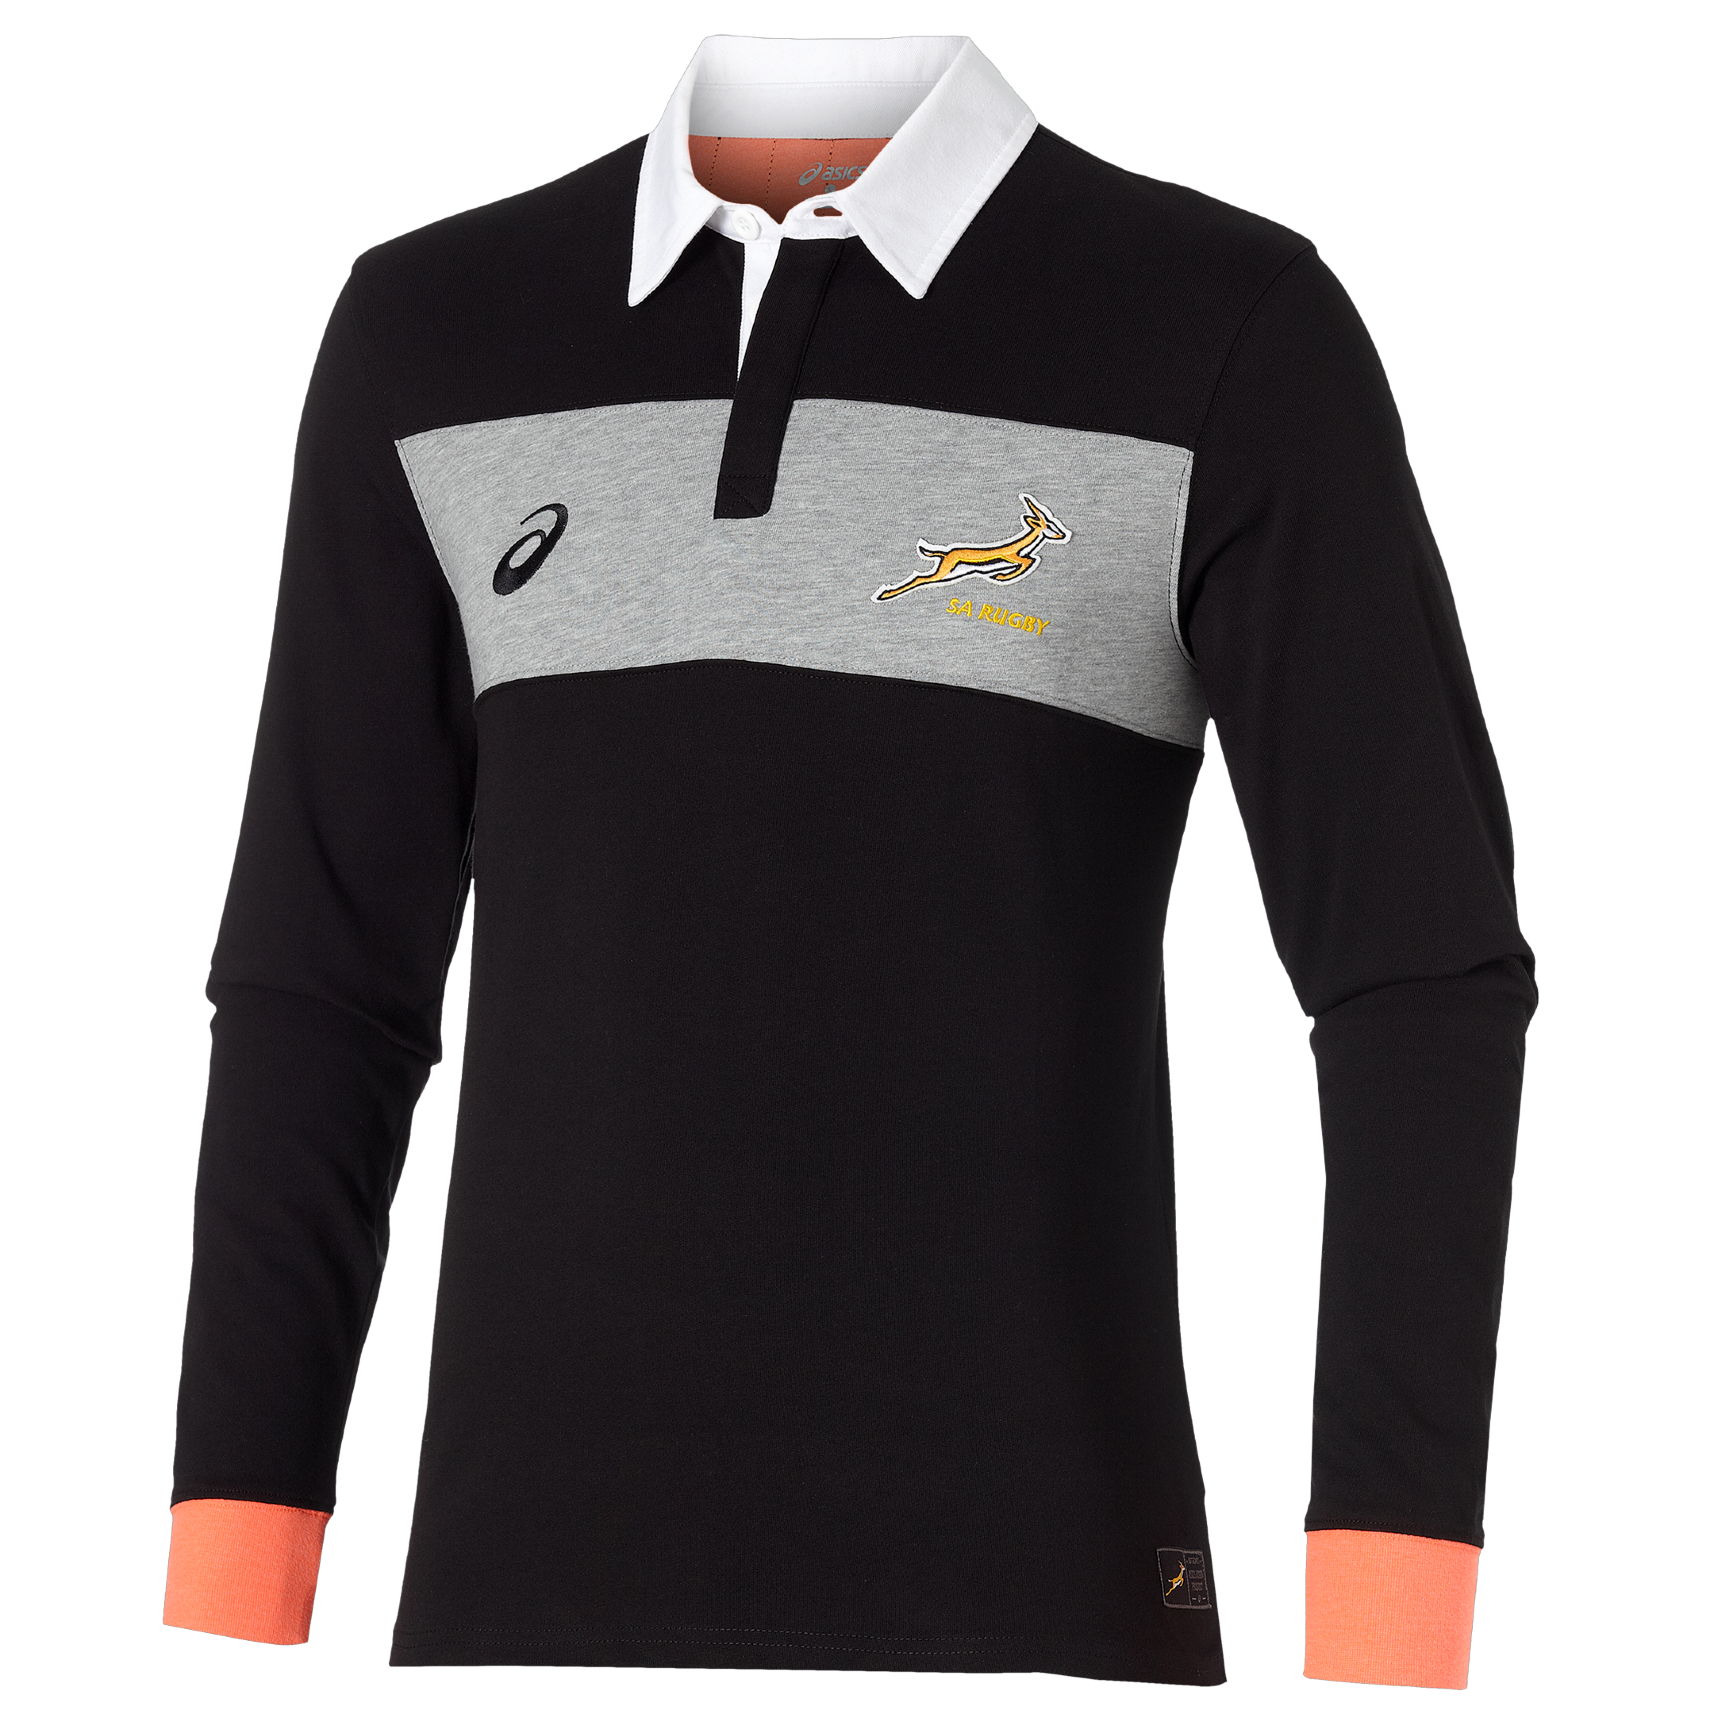 long sleeve springbok rugby jersey